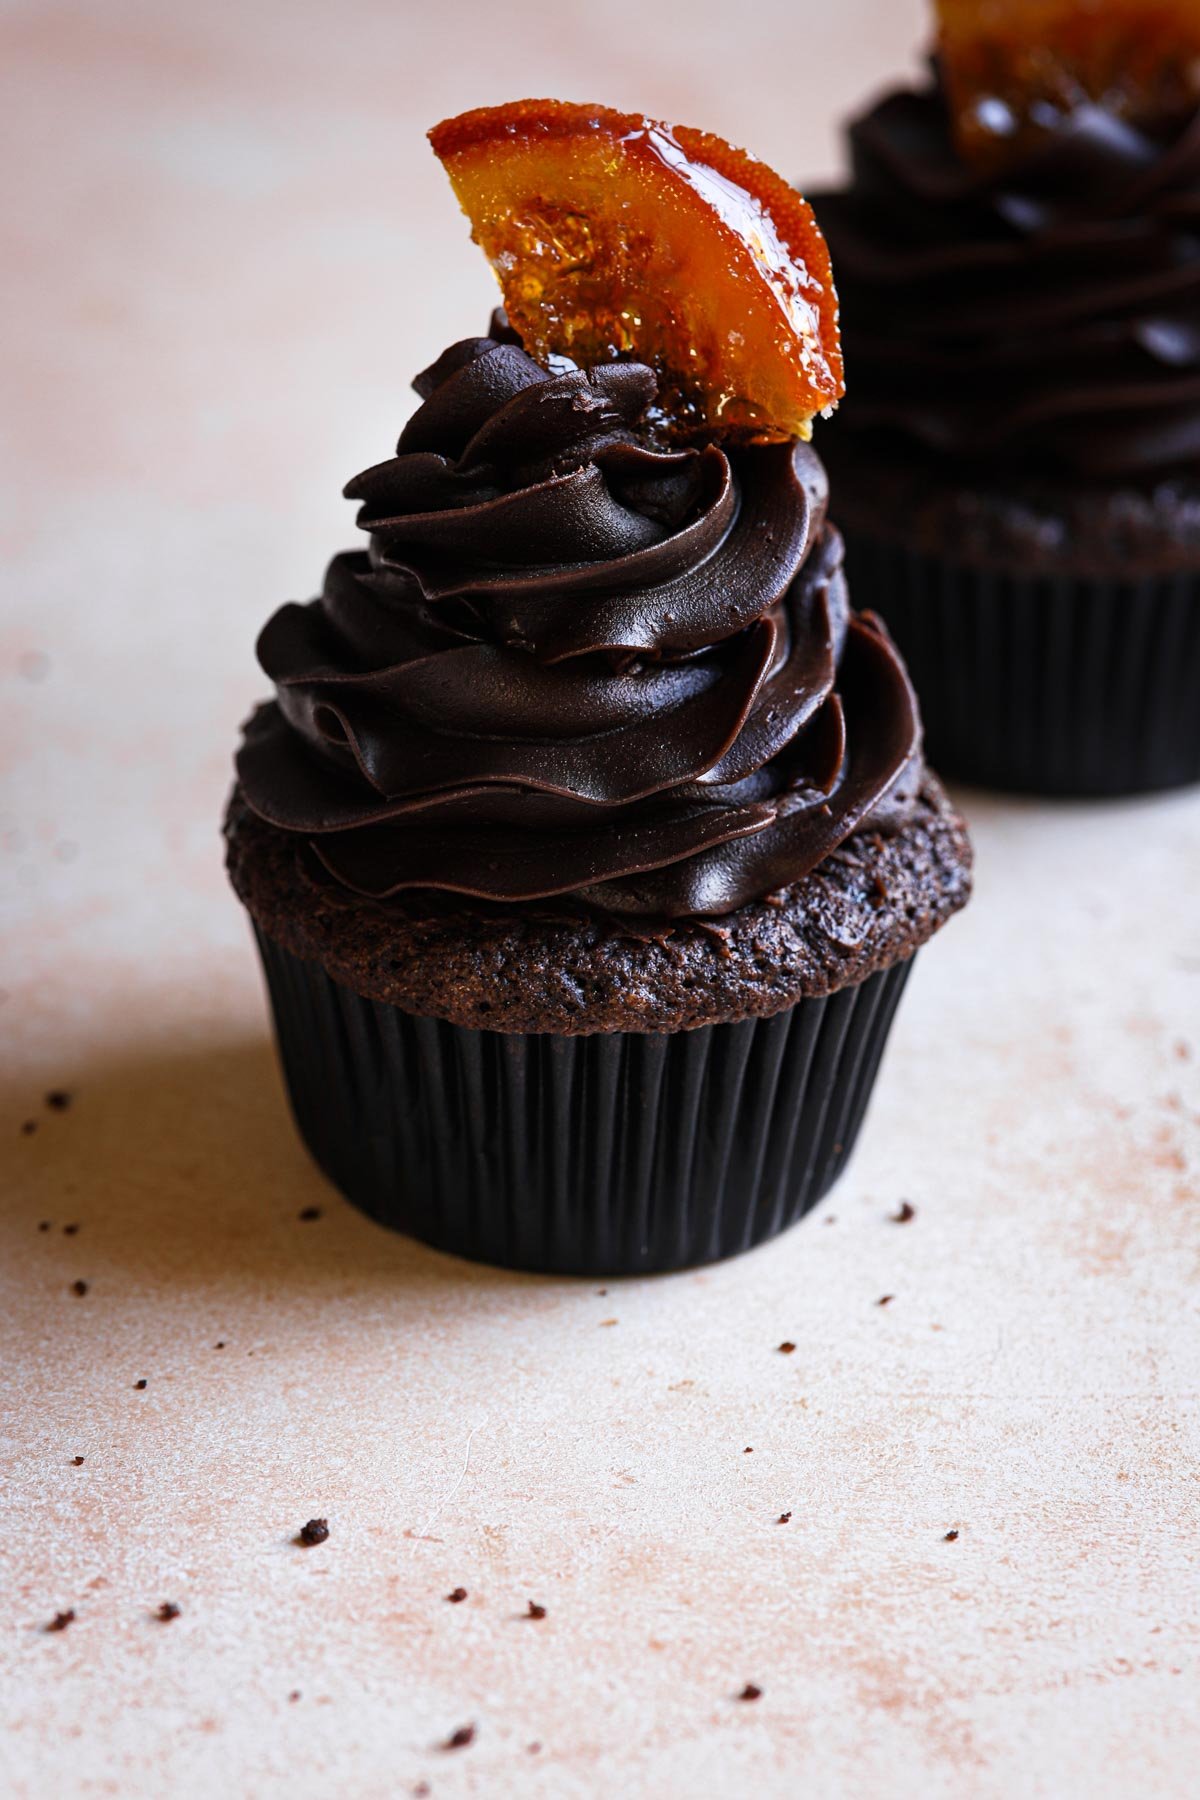 A chocolate orange cupcake topped with chocolate ganache and a slice of candied orange.